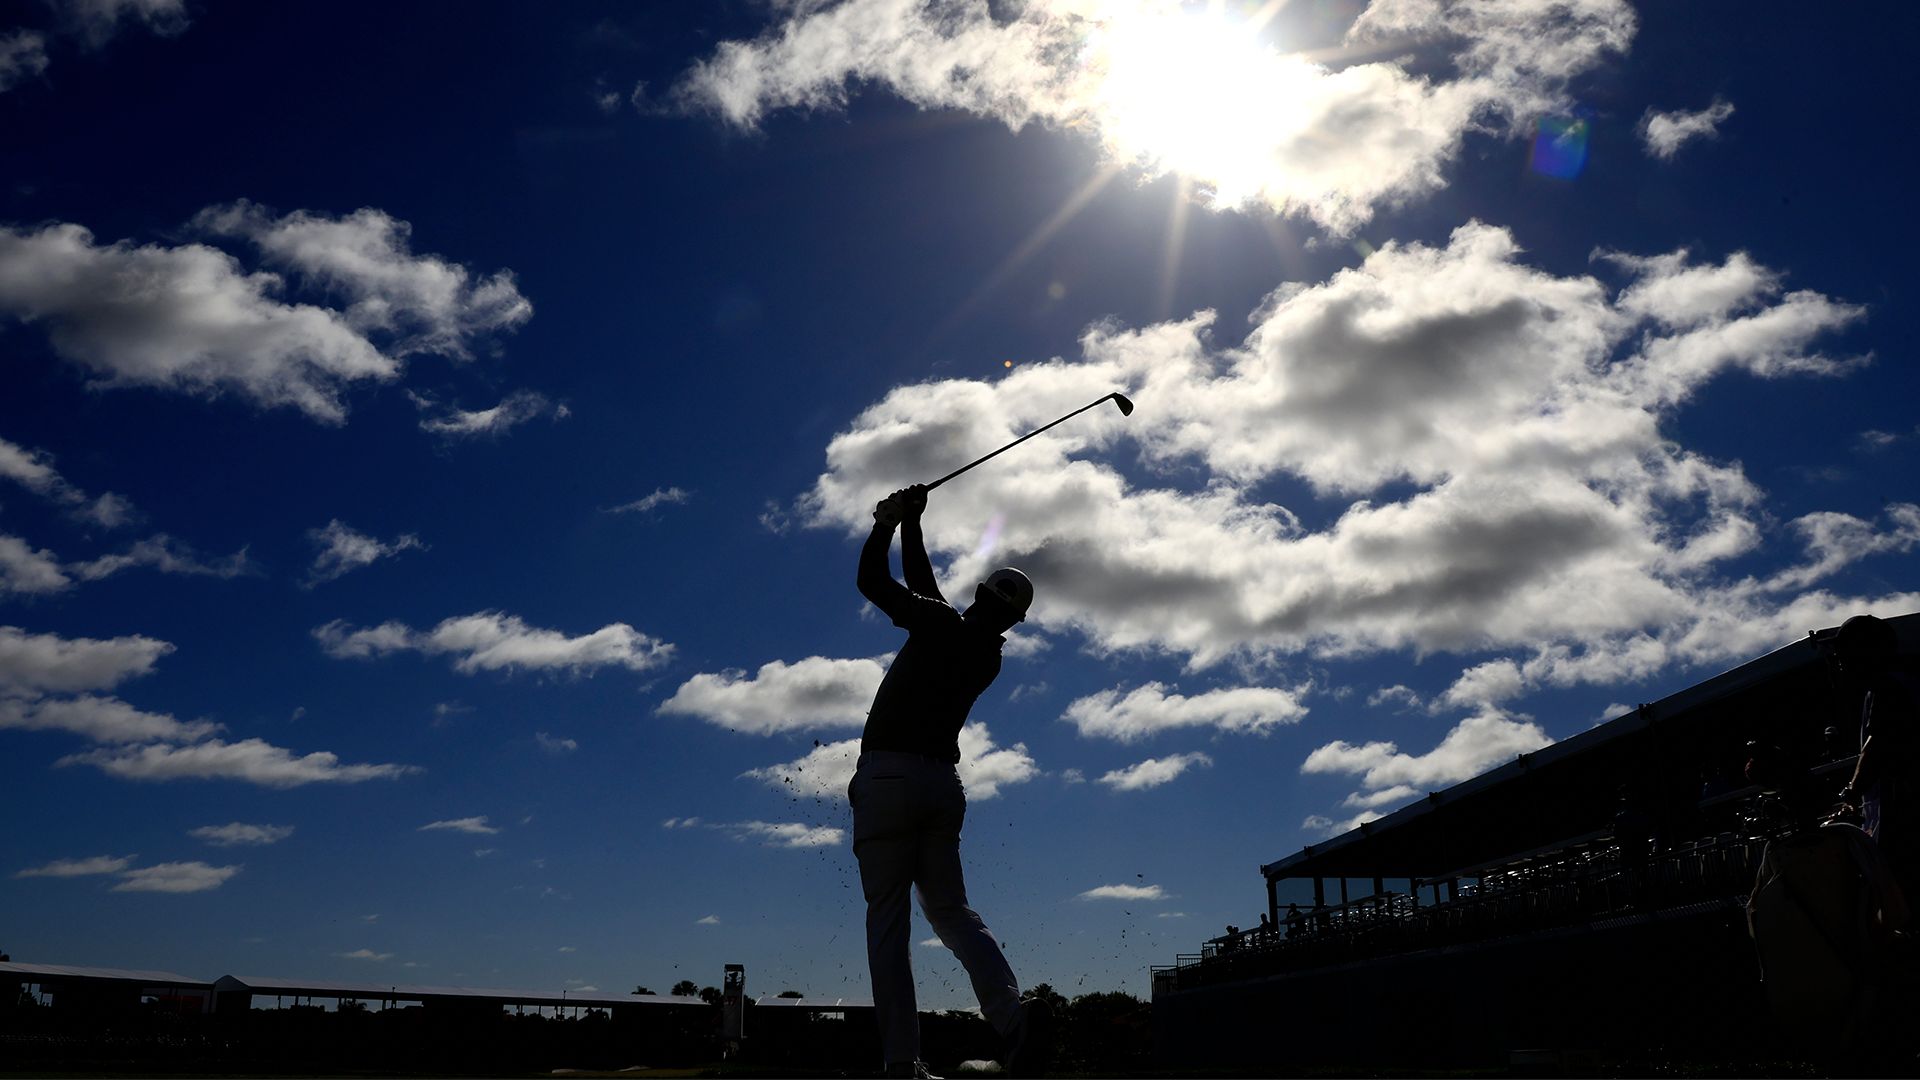 2023 Honda Classic How to watch, TV schedule, tee times